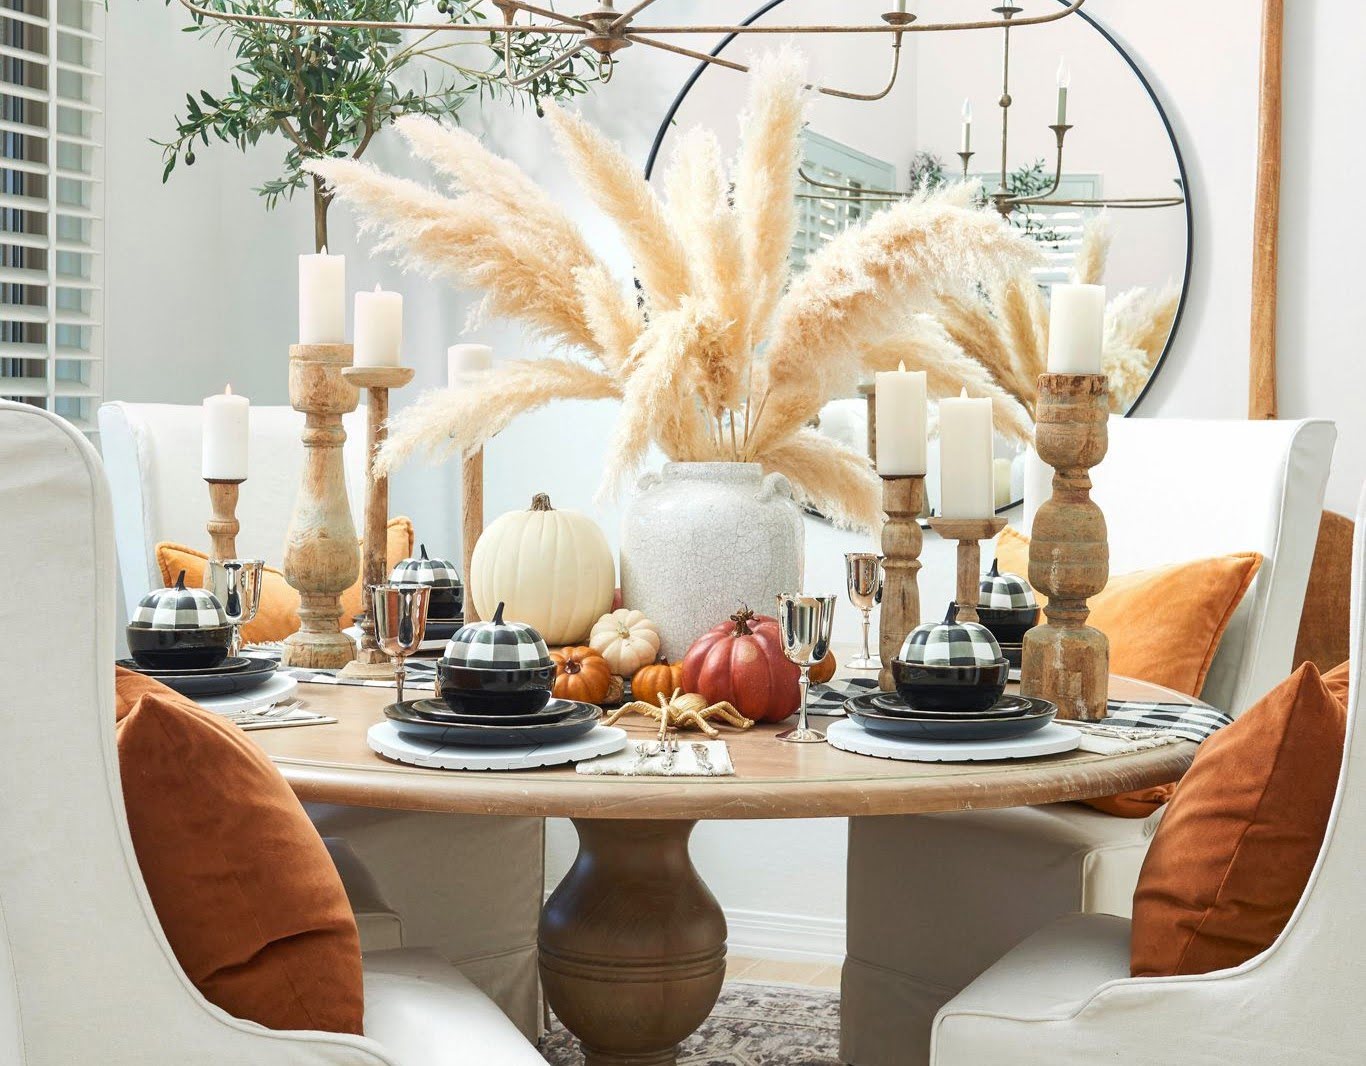 How To Make A Round Spray Table Centerpiece